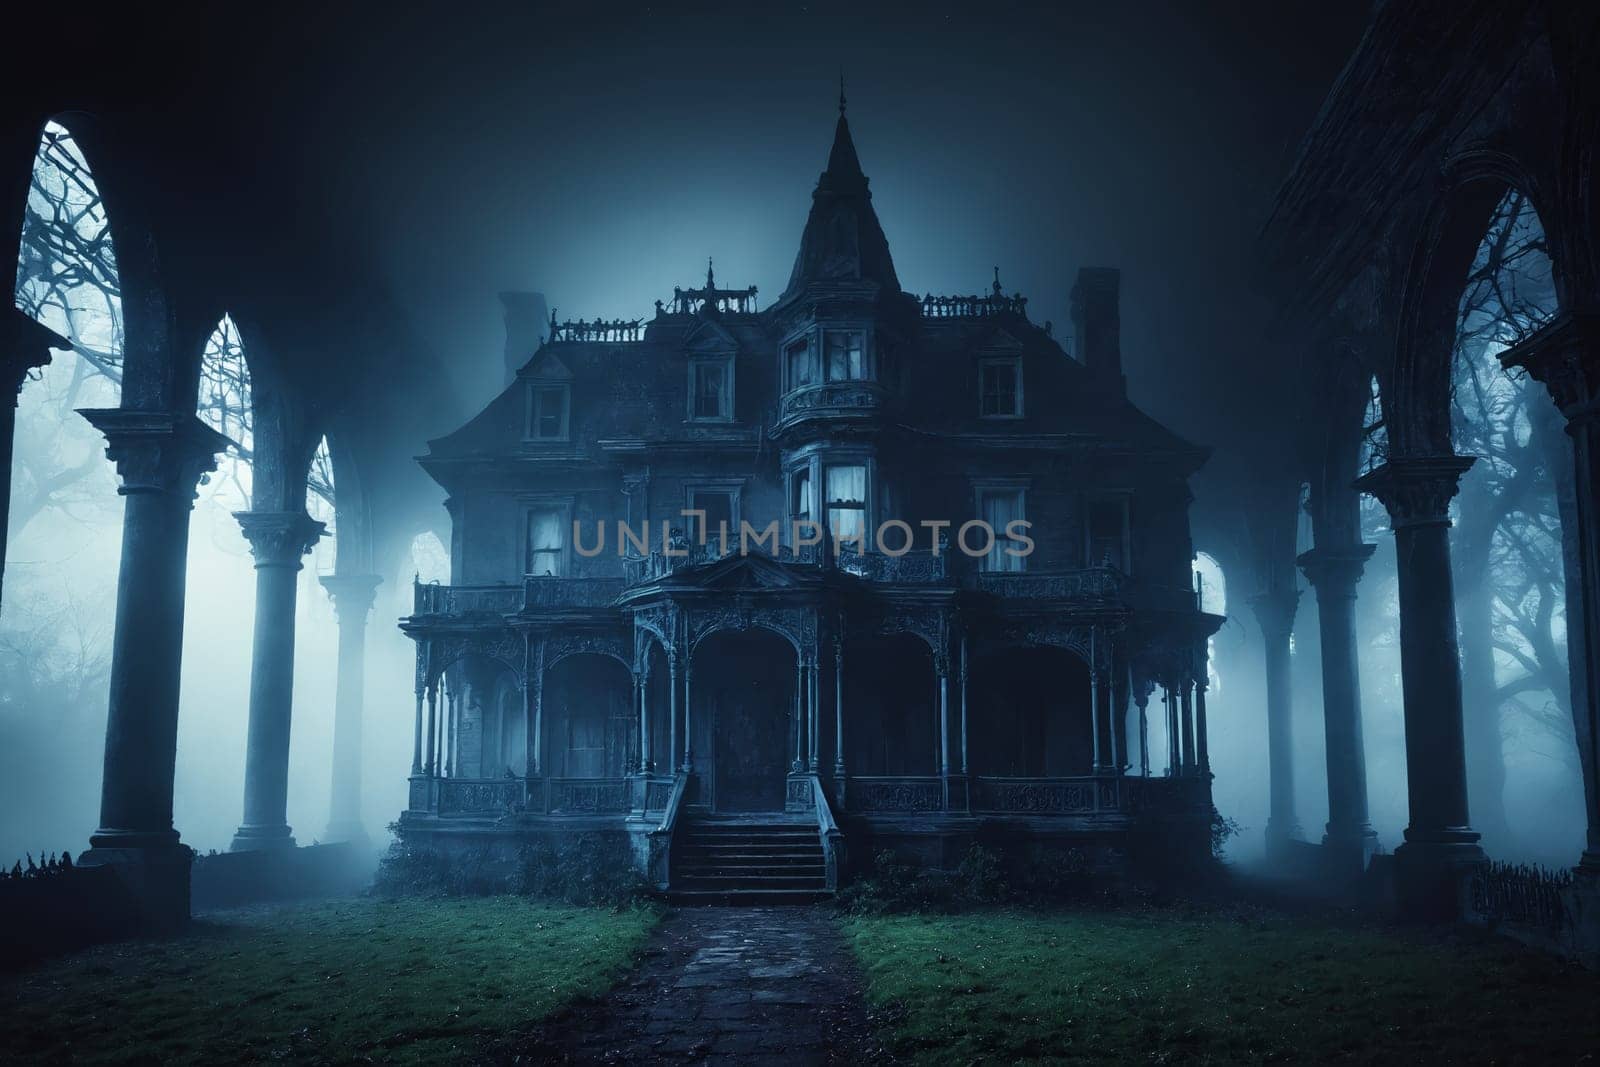 Mysterious Past: A Eerie Echo from an Abandoned Victorian Estate by Andre1ns